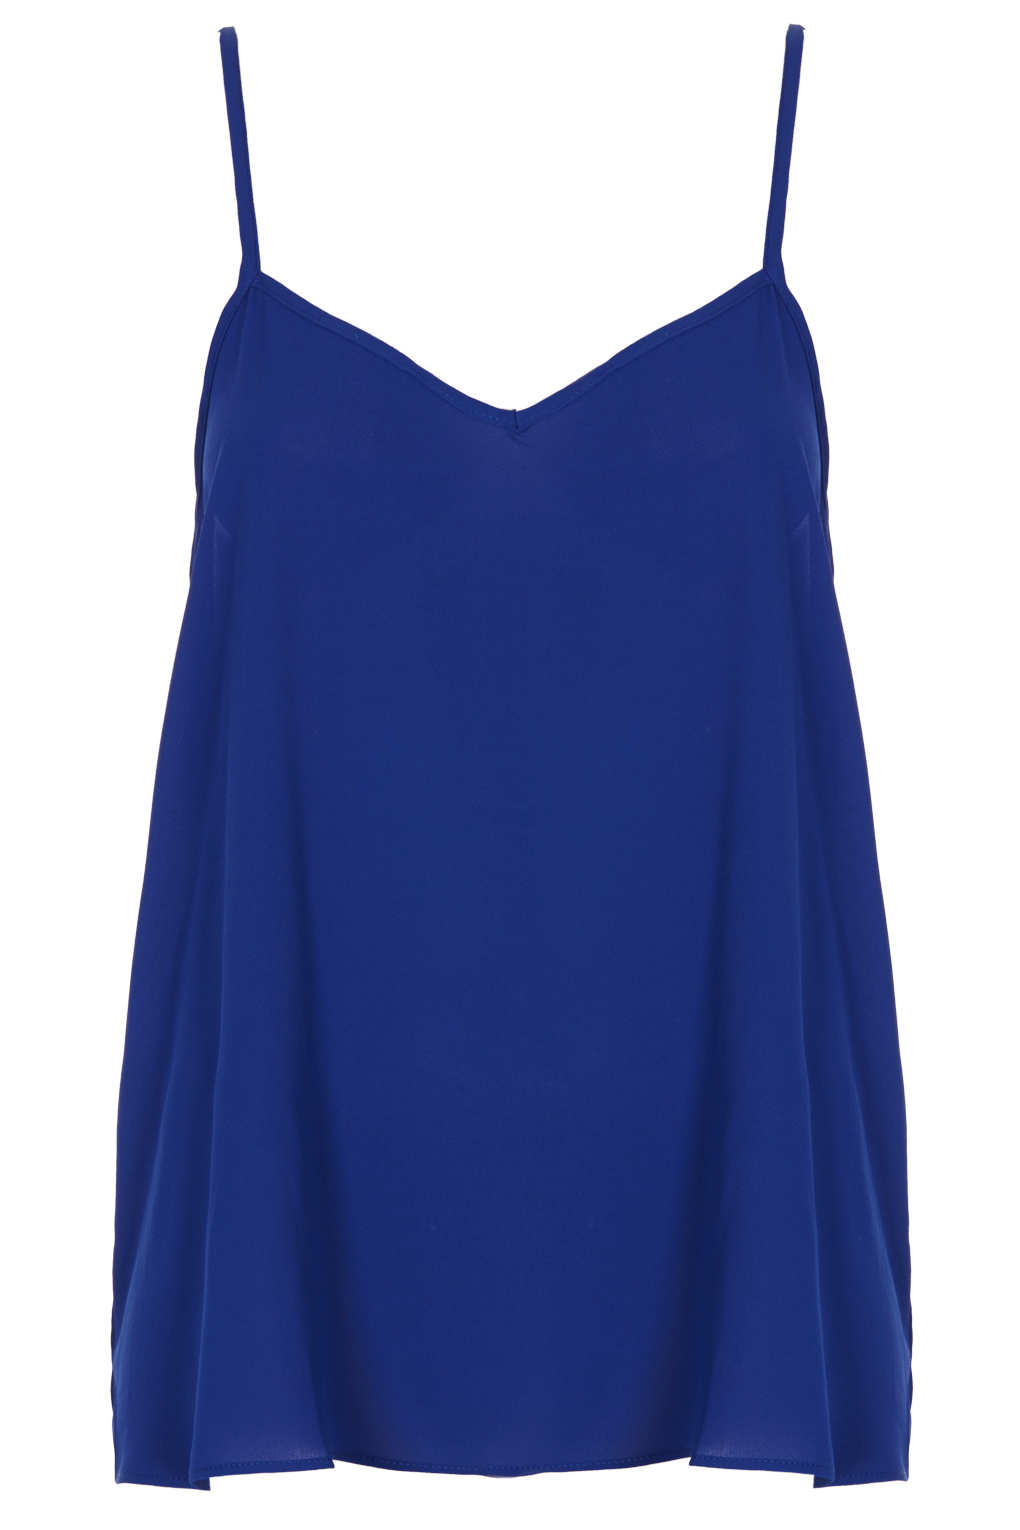 Lyst - Topshop Strappy Vneck Cami in Blue